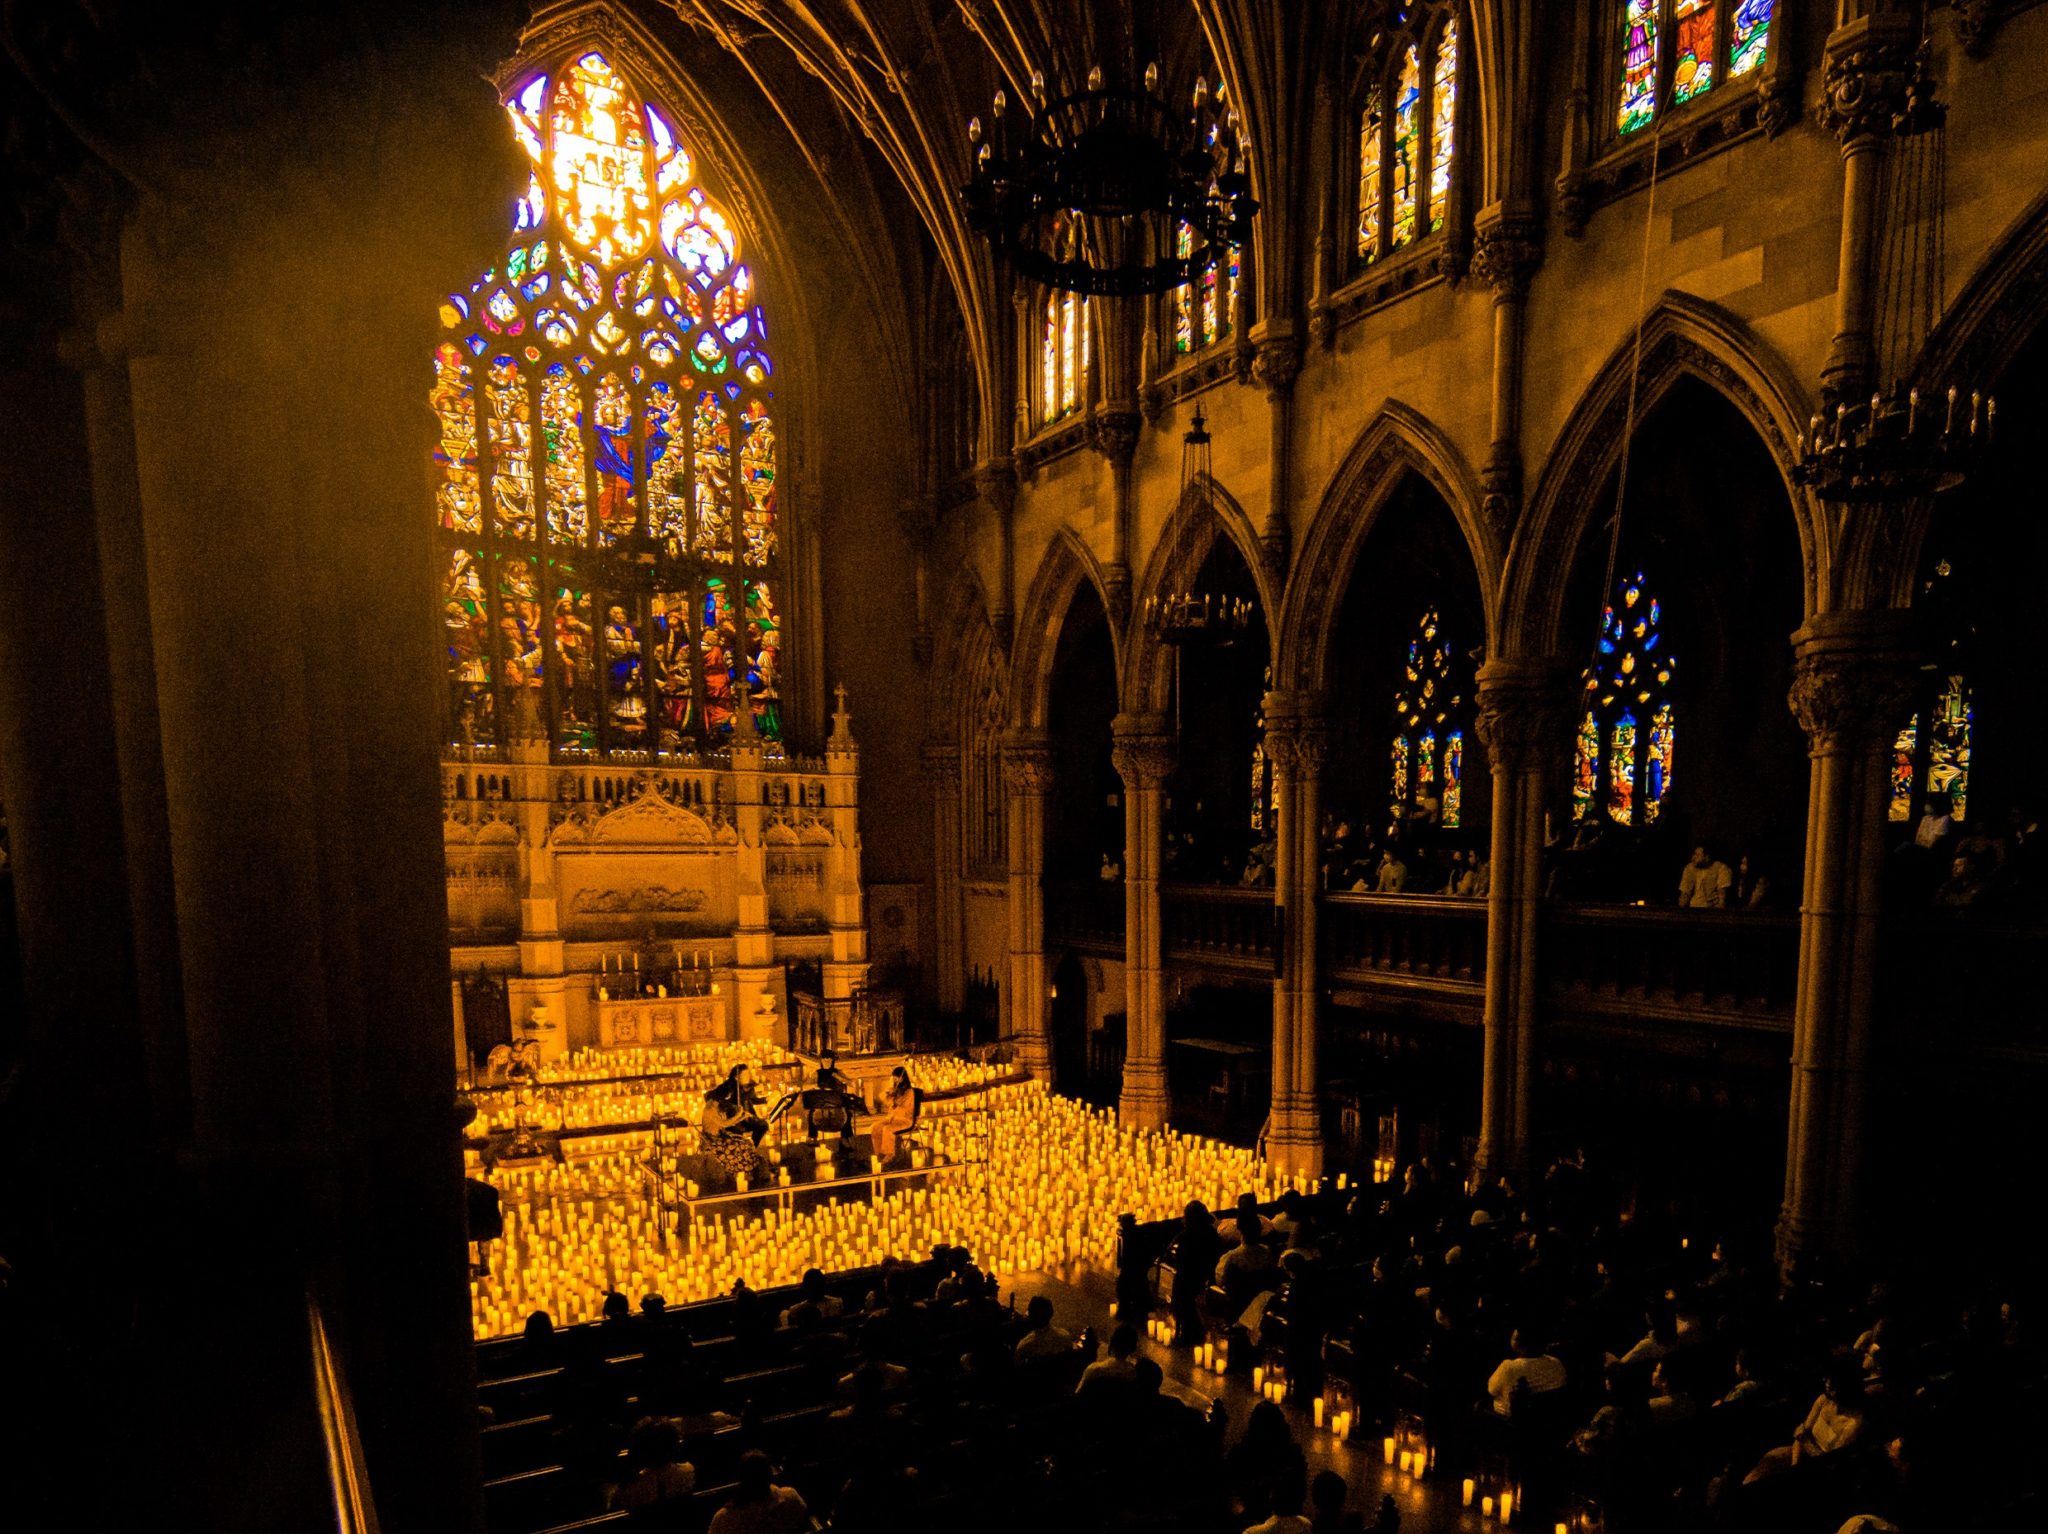 A wide shot of the atlar inside St. Ann's with a string quartet performing surrounded by candles while the pews are filled by the silhouette of an audience.